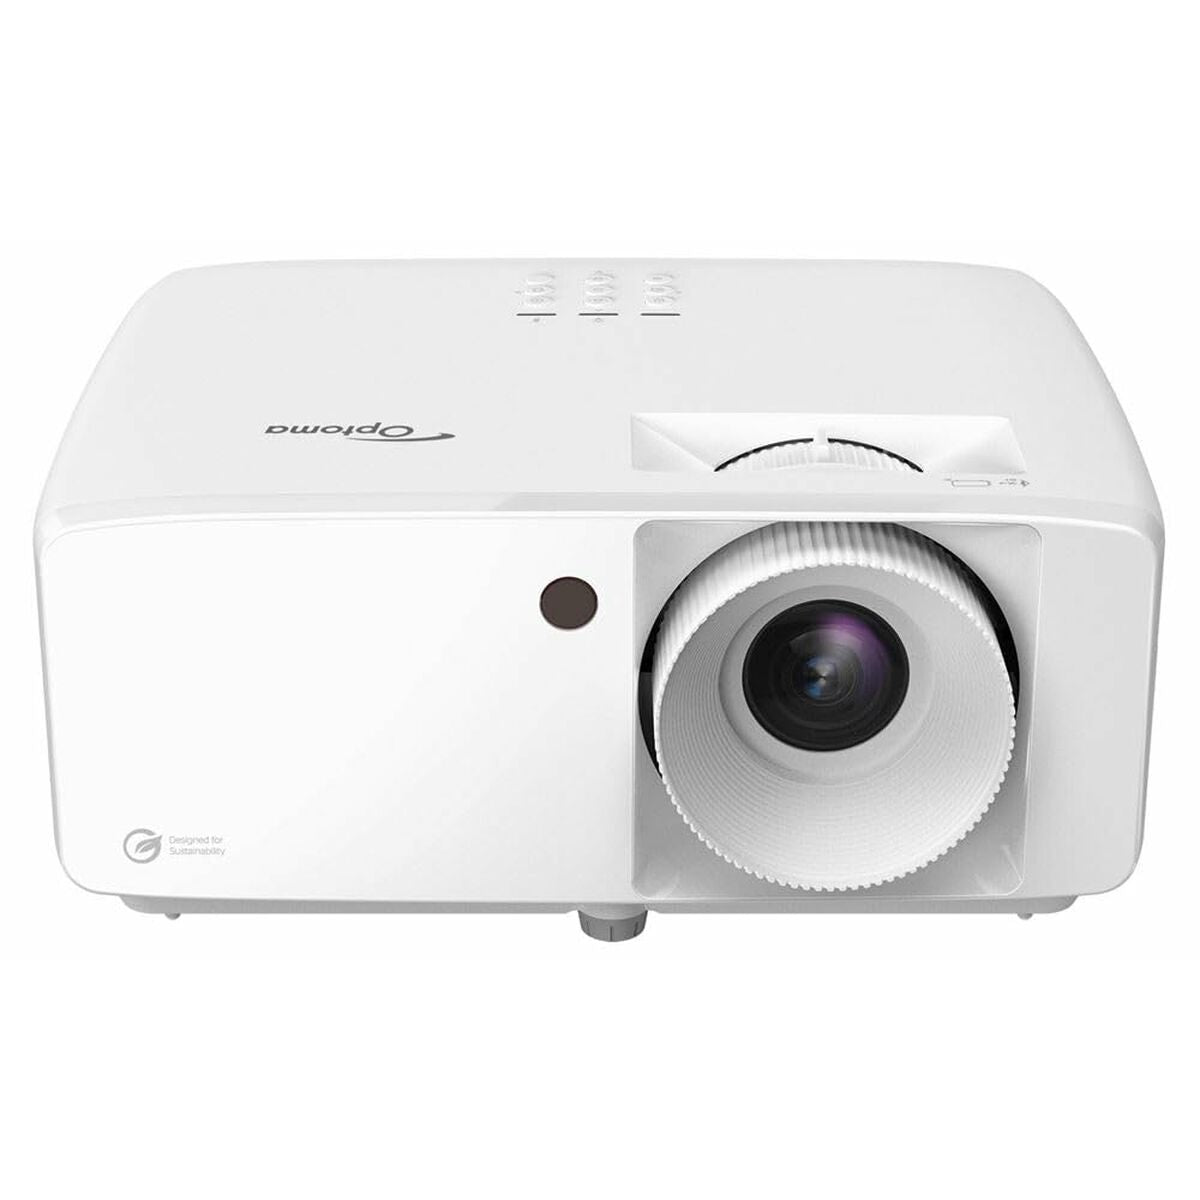 Projector Optoma ZH520 5500 Lm 1920 x 1080 px, Optoma, Electronics, TV, Video and home cinema, projector-optoma-zh520-5500-lm-1920-x-1080-px, :Ultra HD, Brand_Optoma, category-reference-2609, category-reference-2642, category-reference-2947, category-reference-t-18805, category-reference-t-18811, category-reference-t-19653, cinema and television, computers / peripherals, Condition_NEW, entertainment, office, Price_+ 1000, RiotNook